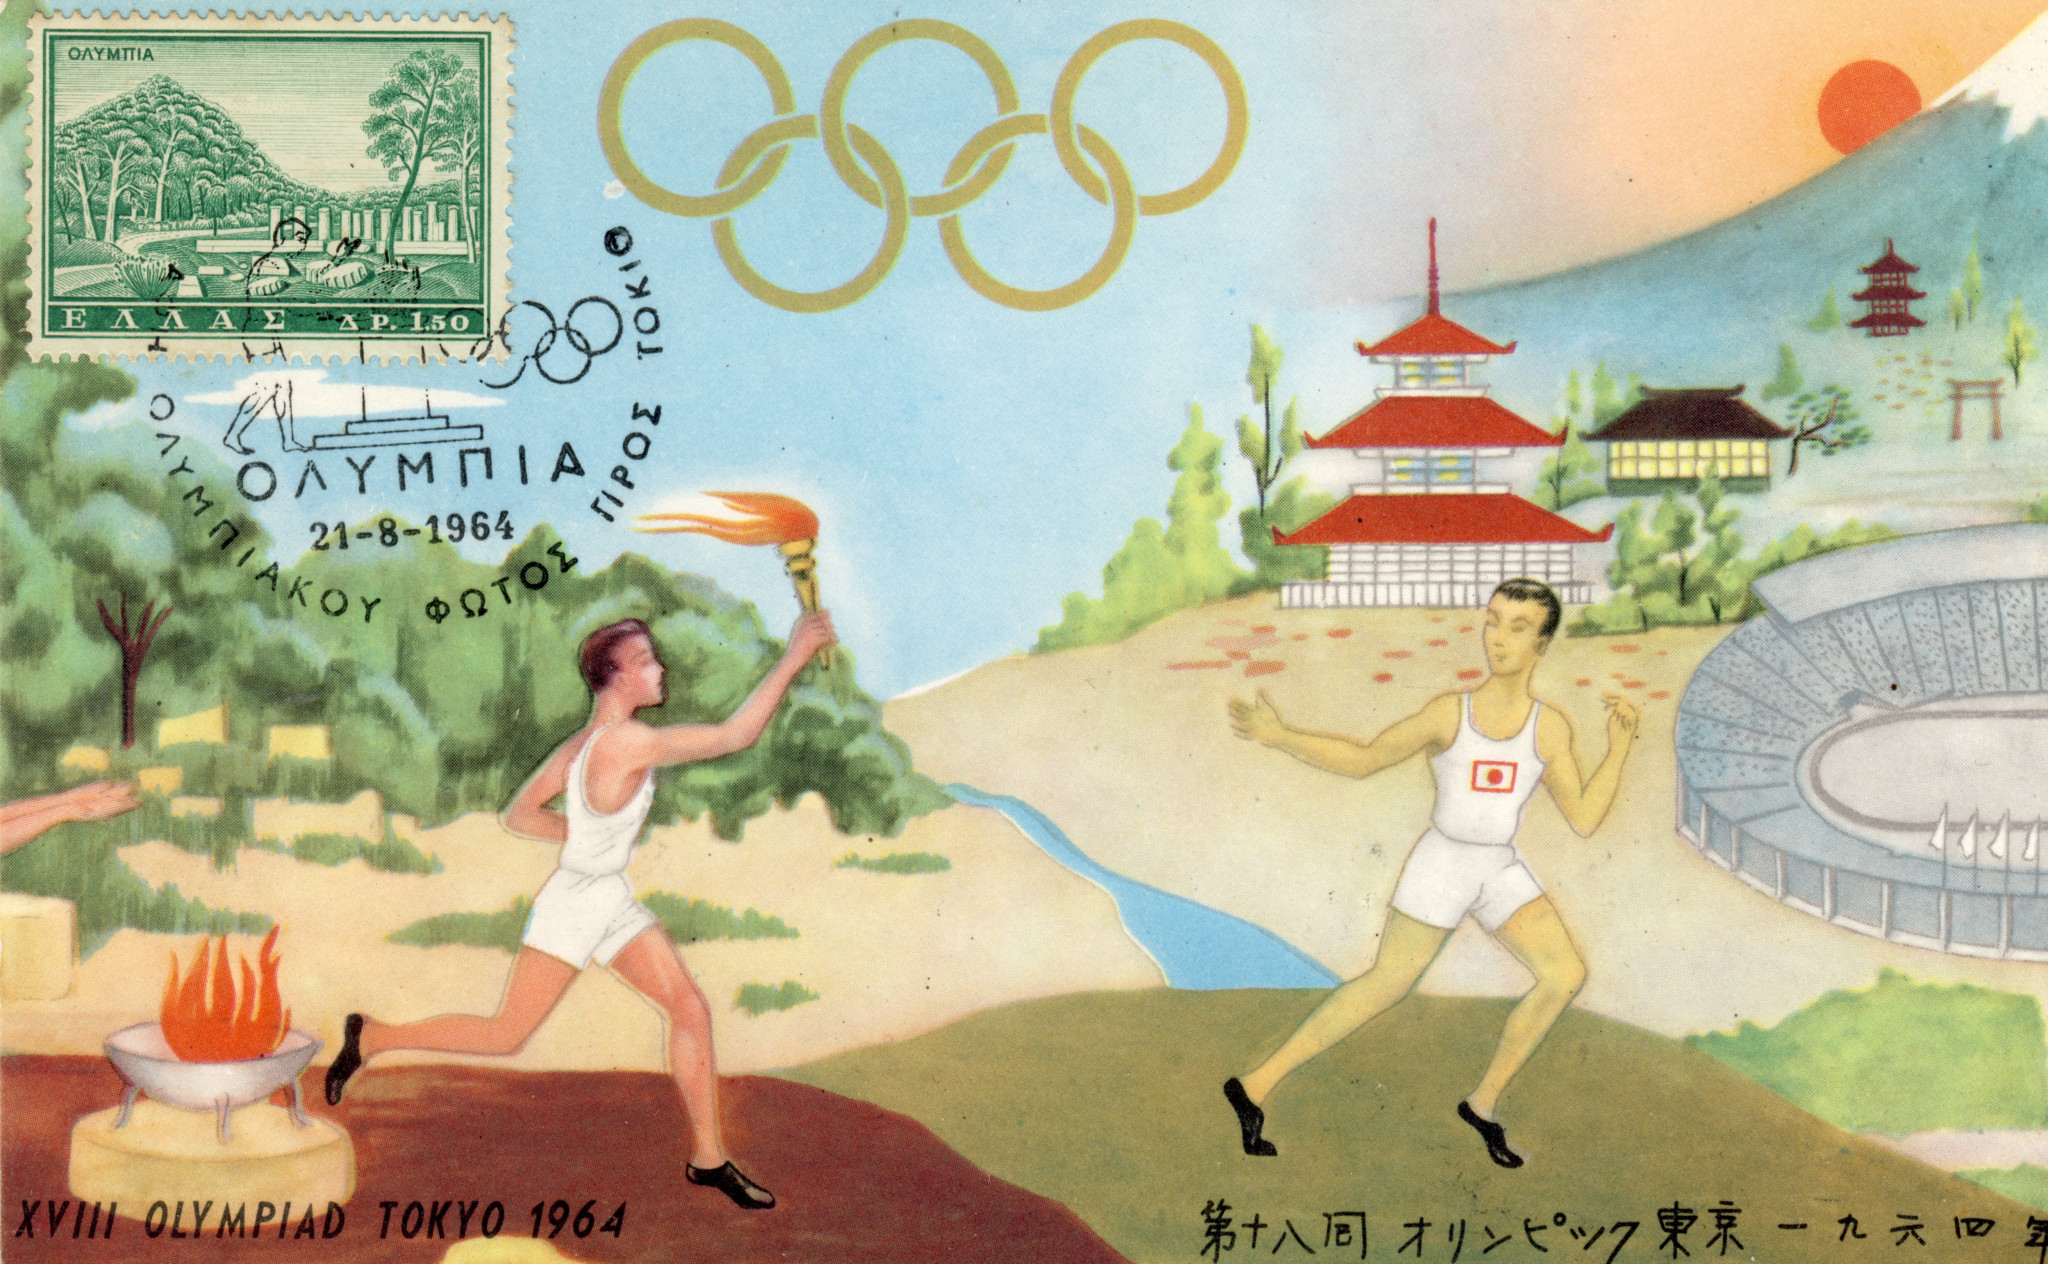 A 1964 first day cover produced in Greece ©International Olympic Academy